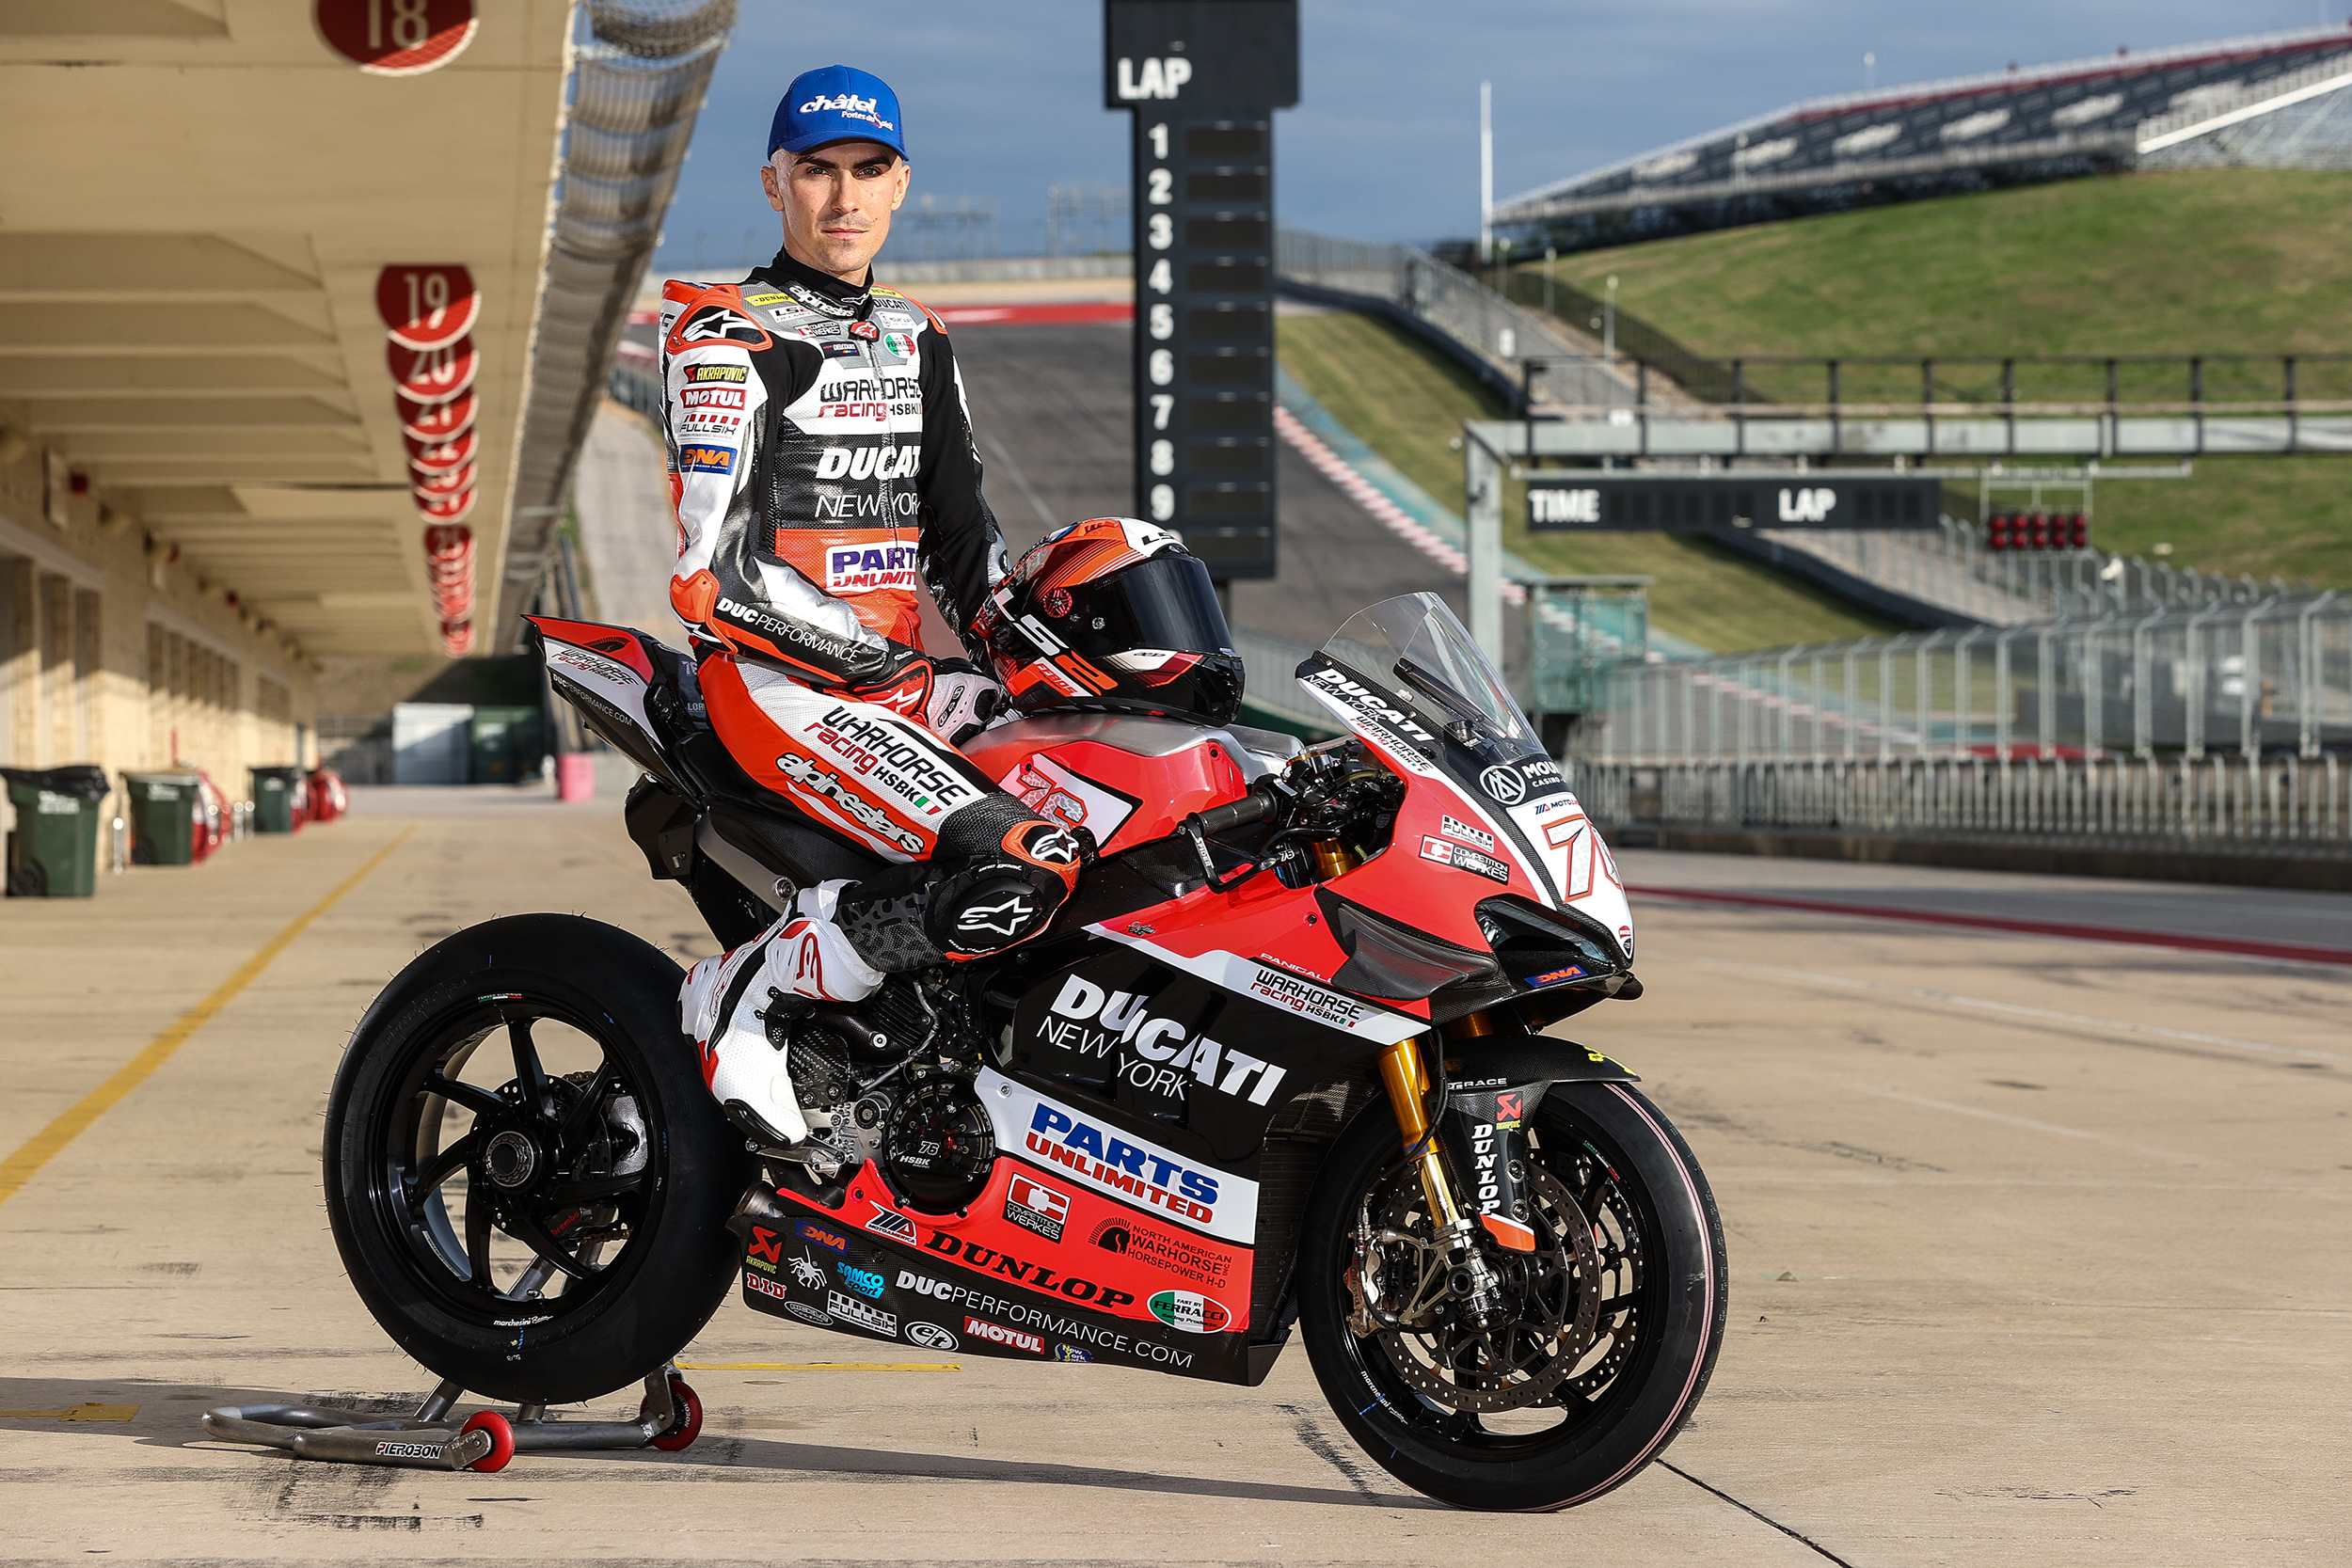 Loris Baz astride his Warhorse HSBK Racing Ducati New York entry, ready to complete in the opening round of MotoAmerica, at the Pittsburgh International Raceway